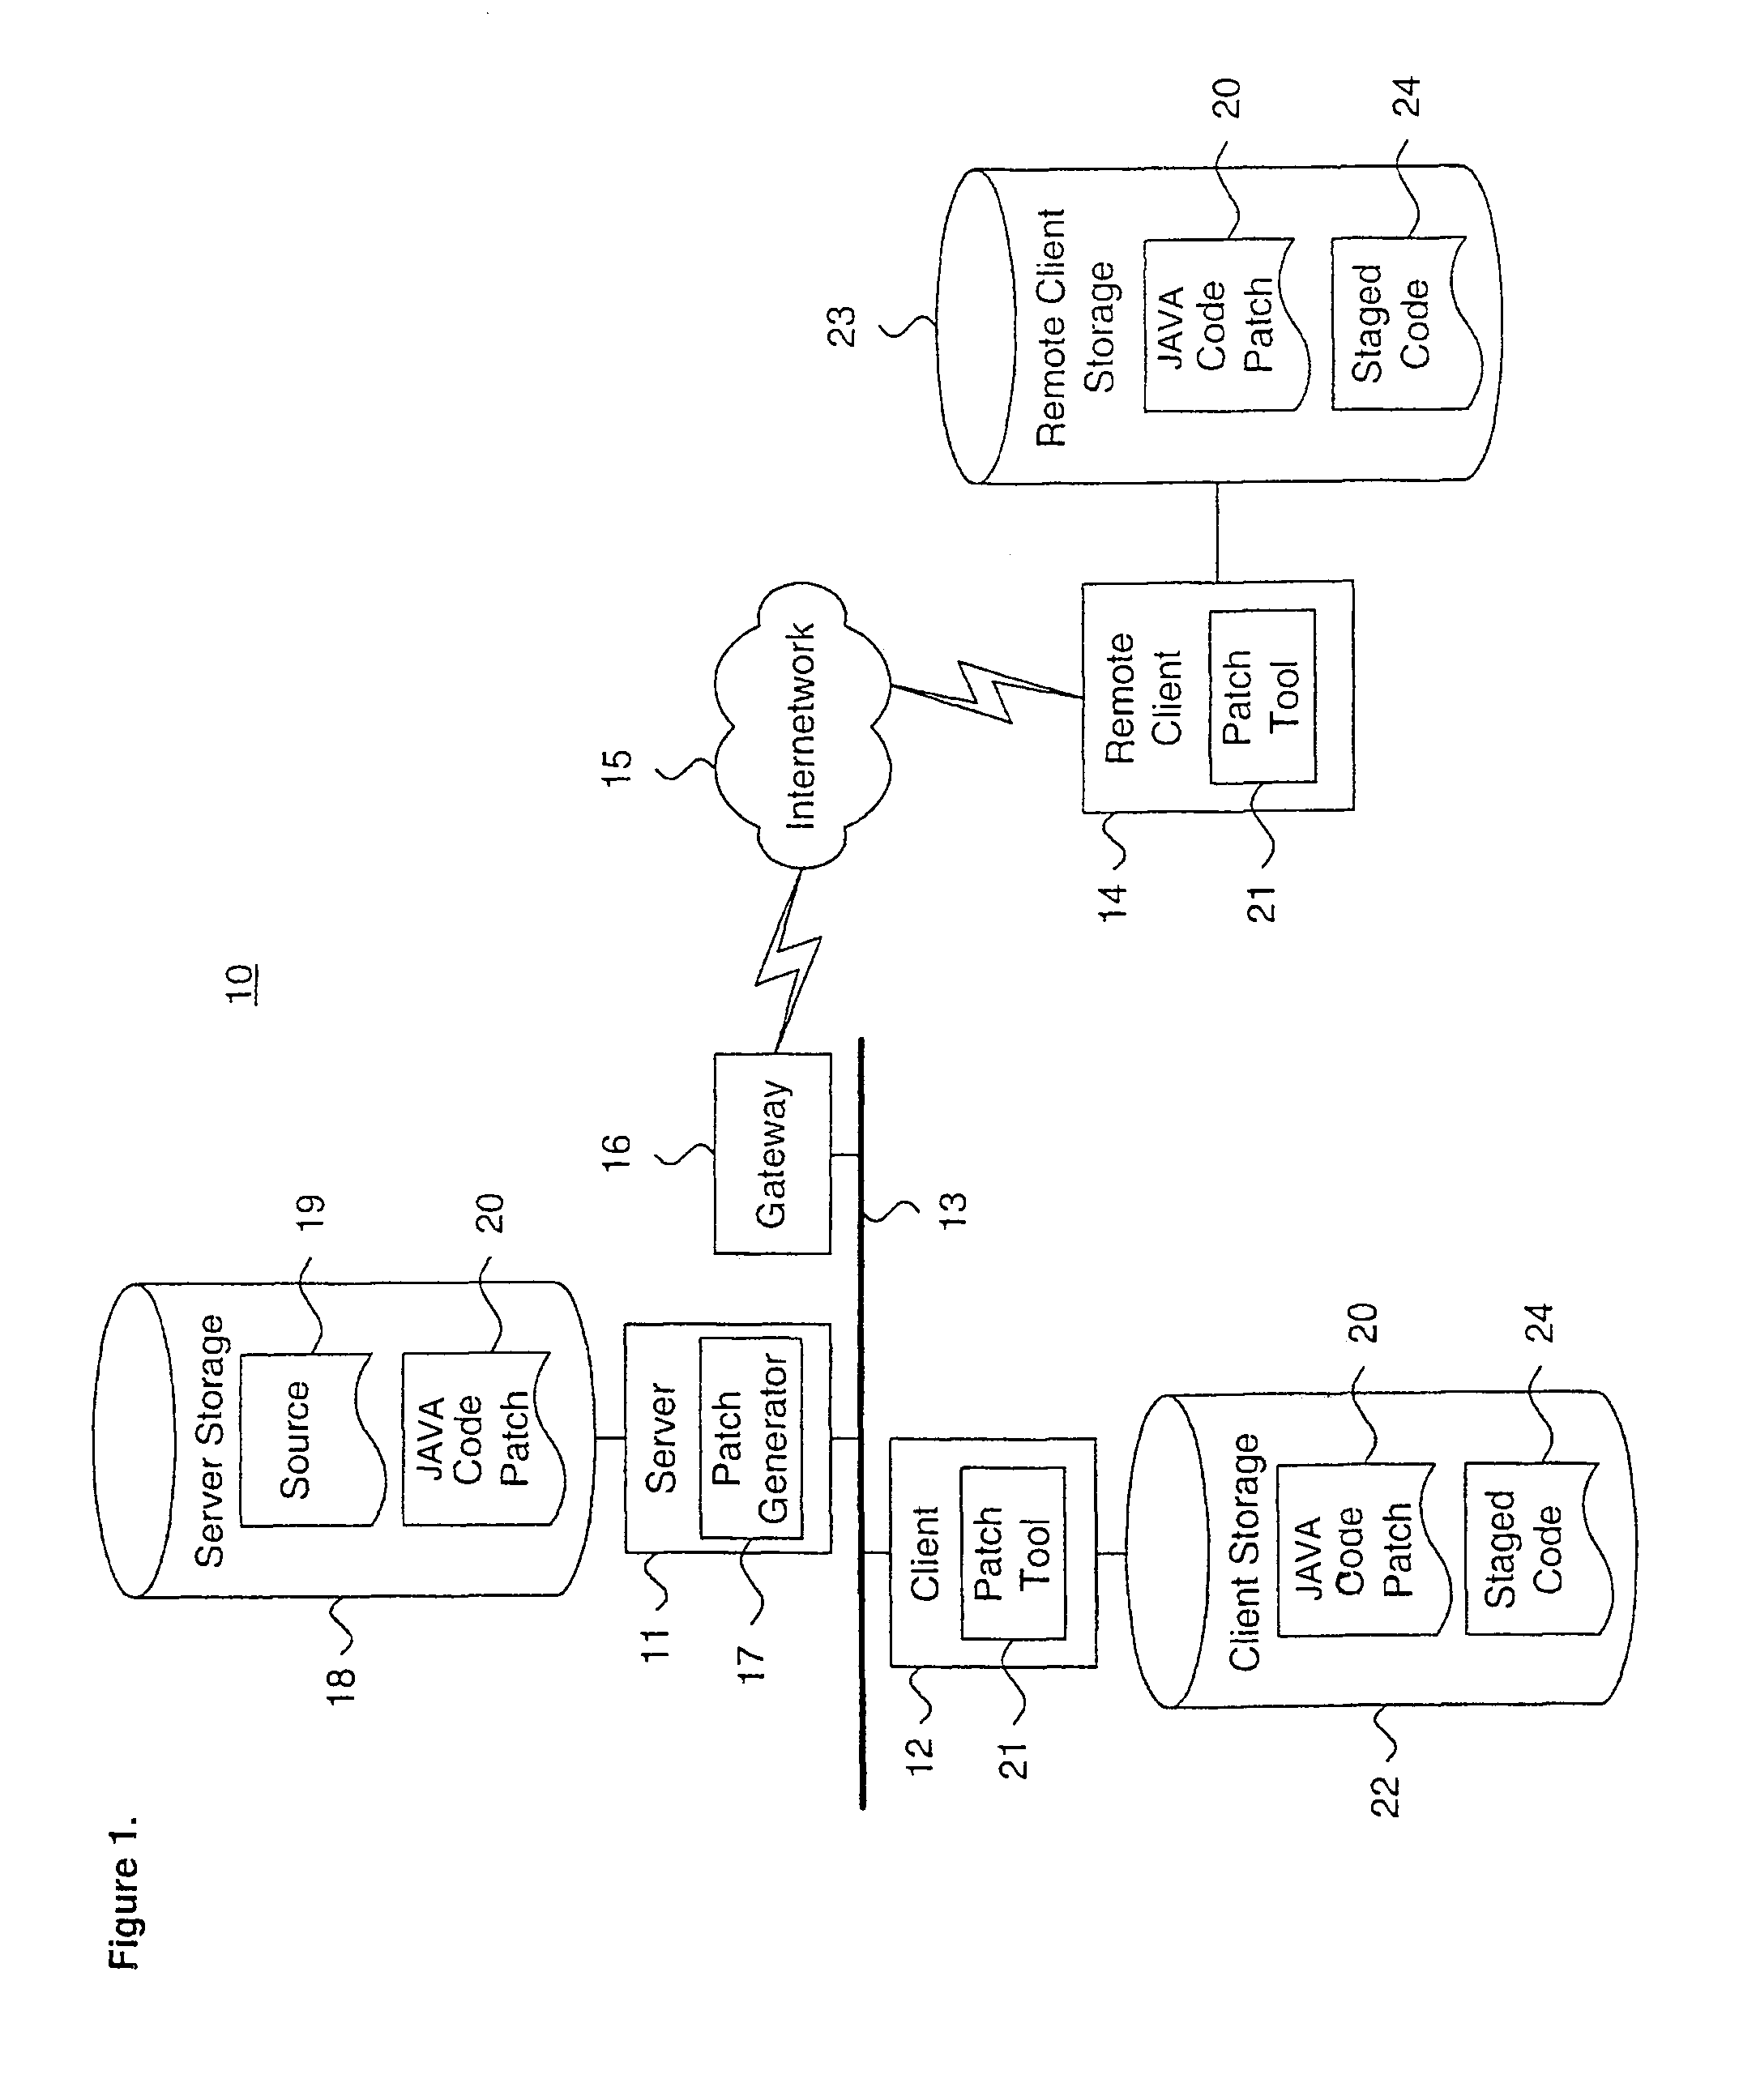 System and method for providing a java code release infrastructure with granular code patching